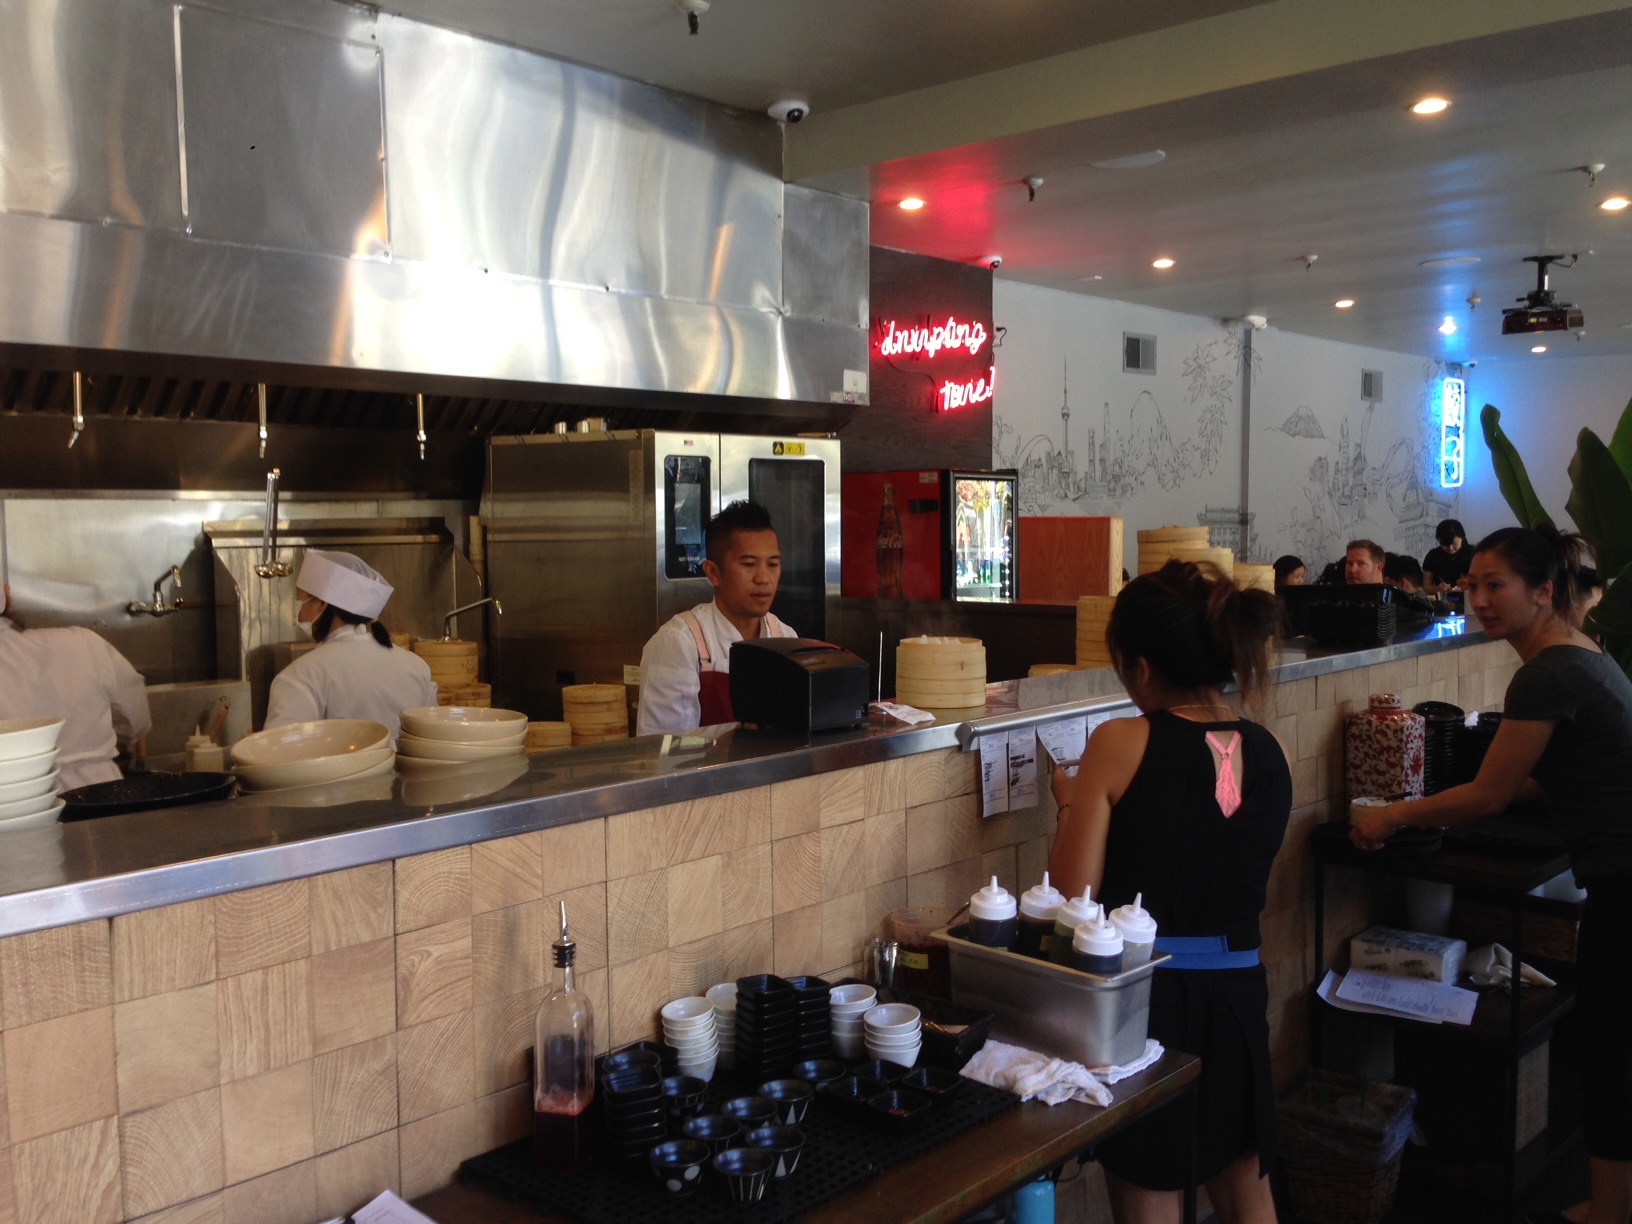 The open kitchen counter at Dumpling Time.